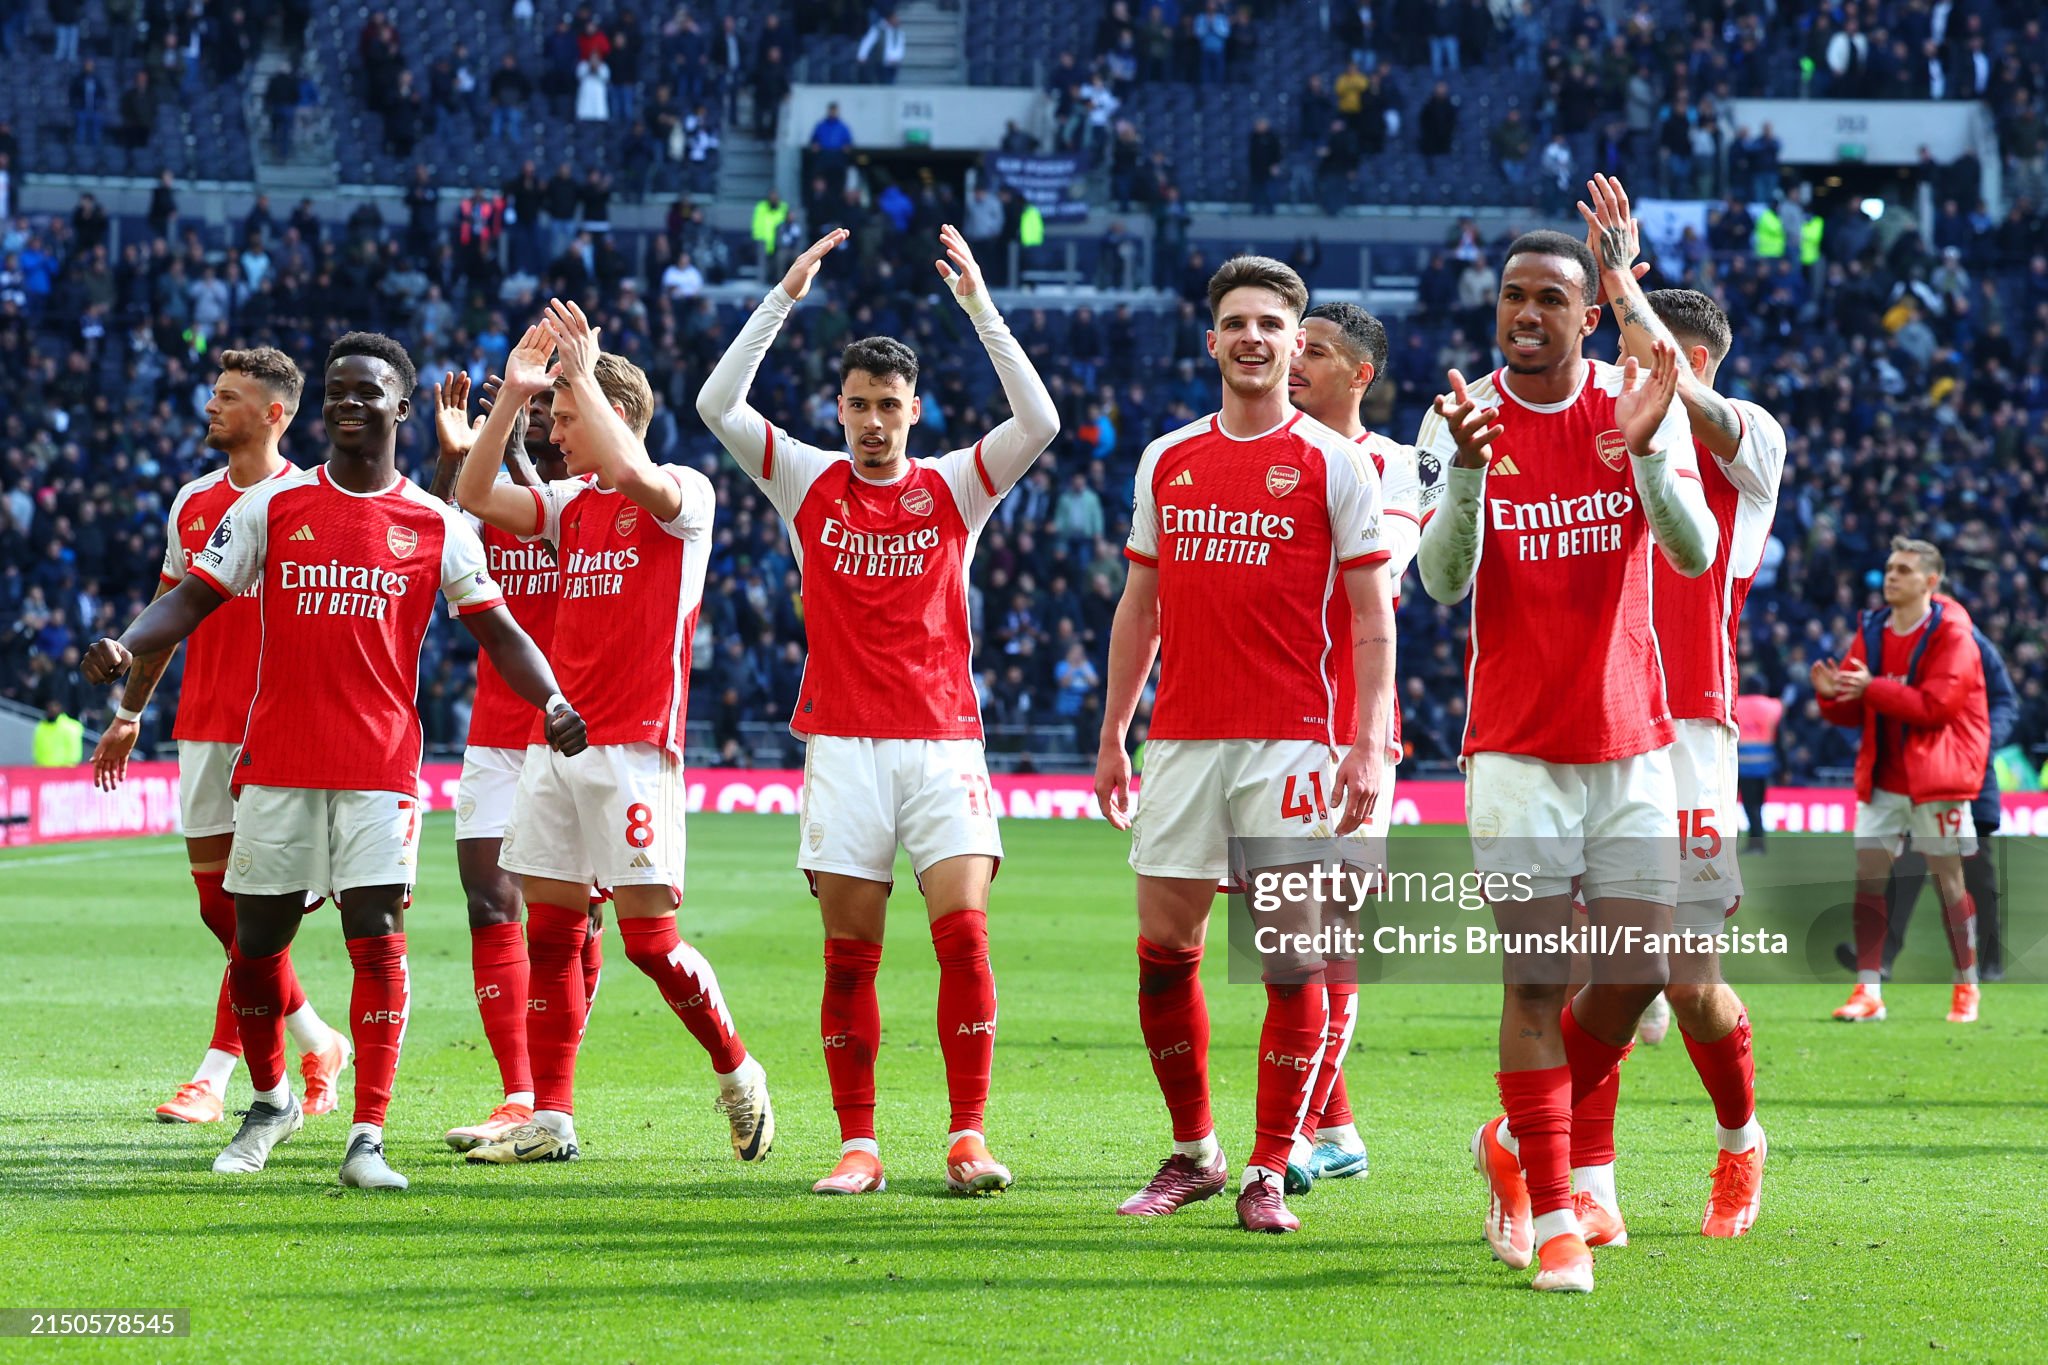 Arsenal wins derby against Tottenham and continues strong in the title race